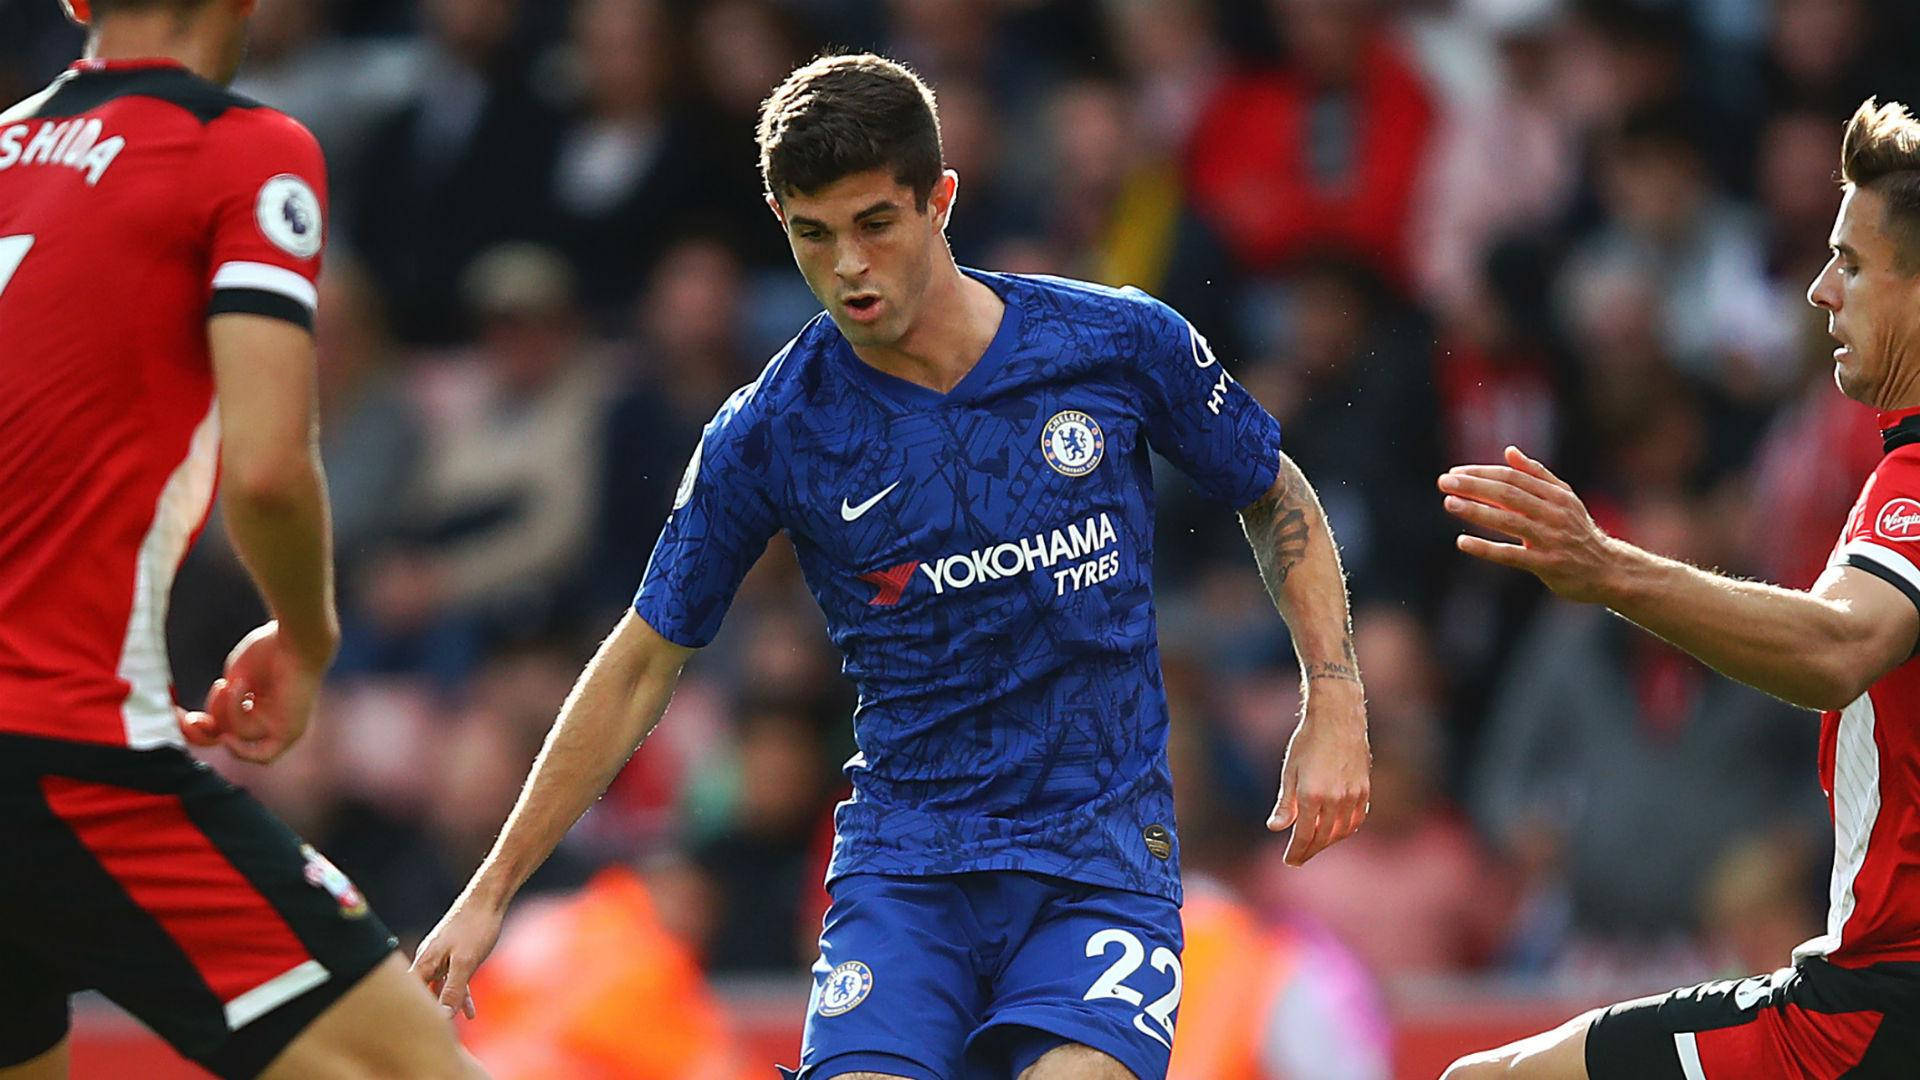 Bychelsea's Blue - Christian Pulisic Omgiven Av Chelsea's Blåa Färger (referring To A Wallpaper Featuring The Chelsea Footballer Surrounded By The Team's Blue Colors) Wallpaper